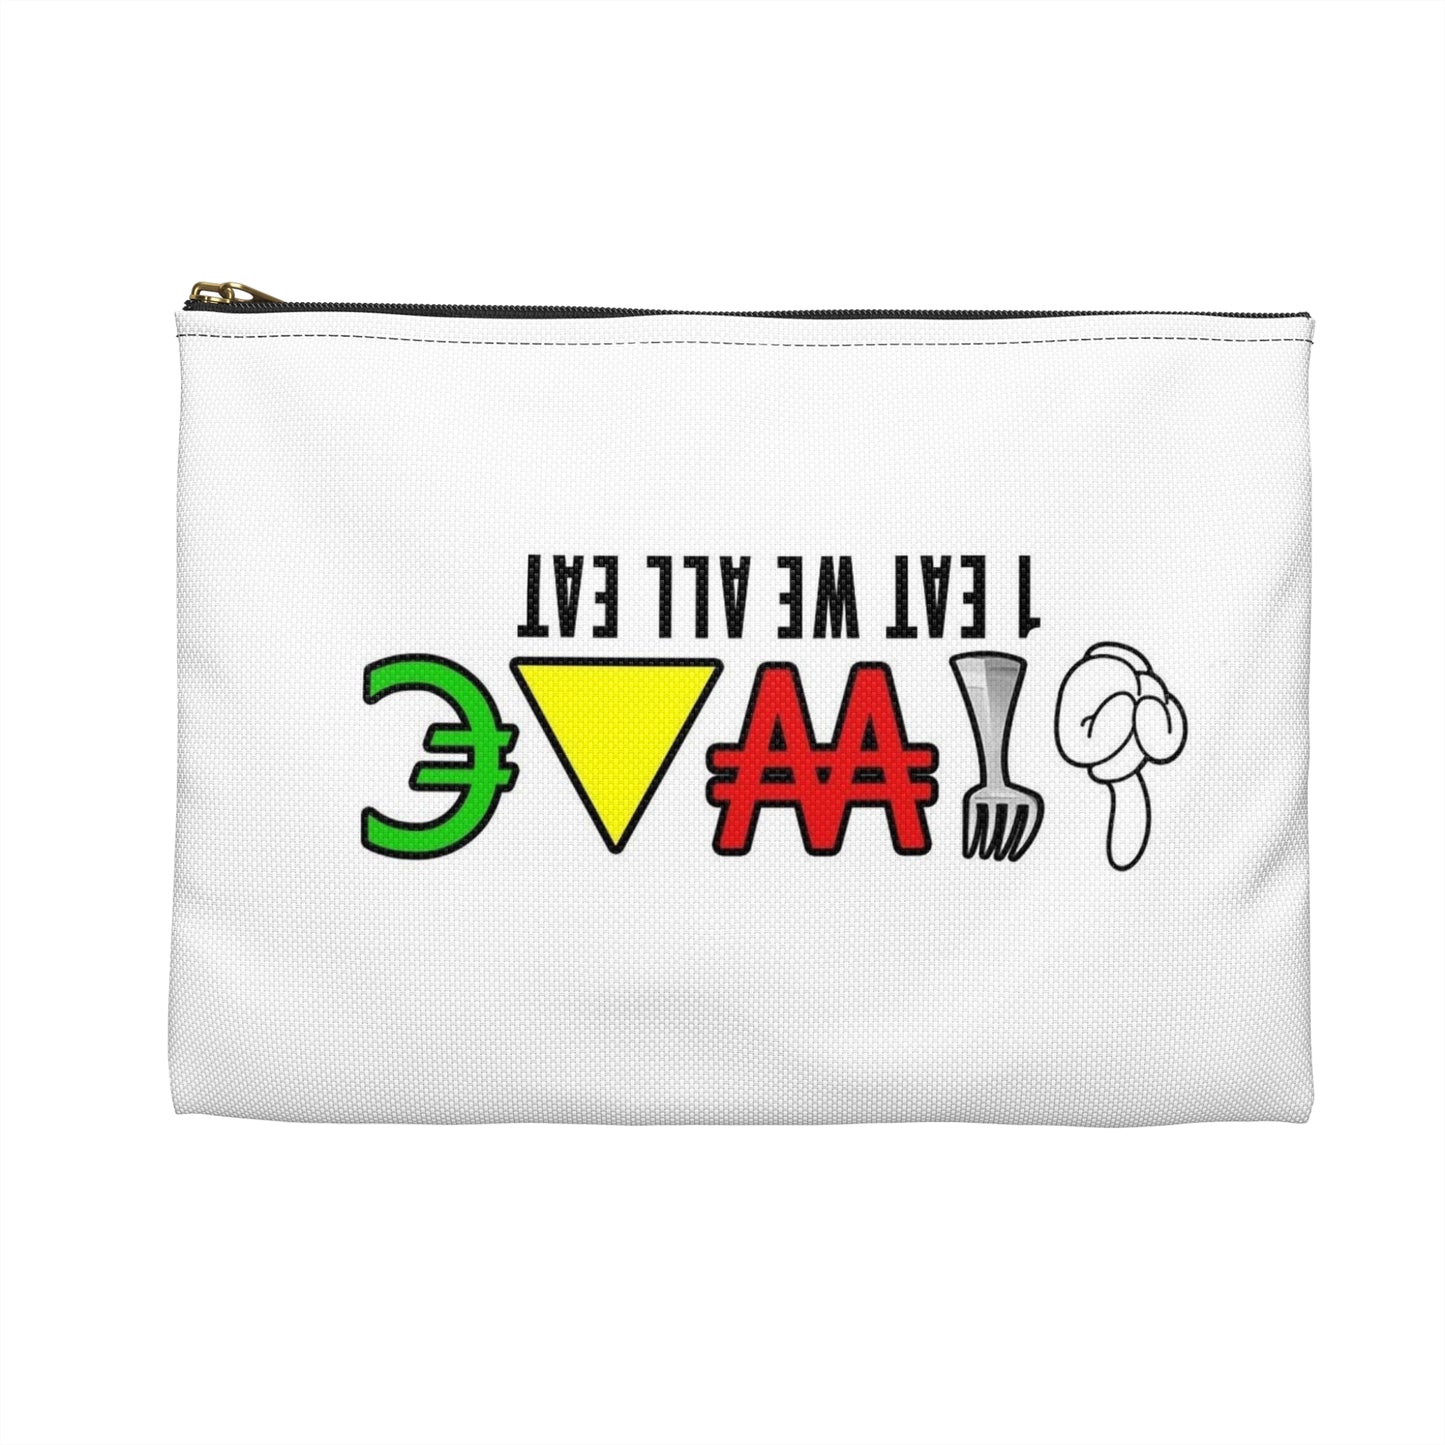 1 Eat We All Eat " Women "Accessory Pouch